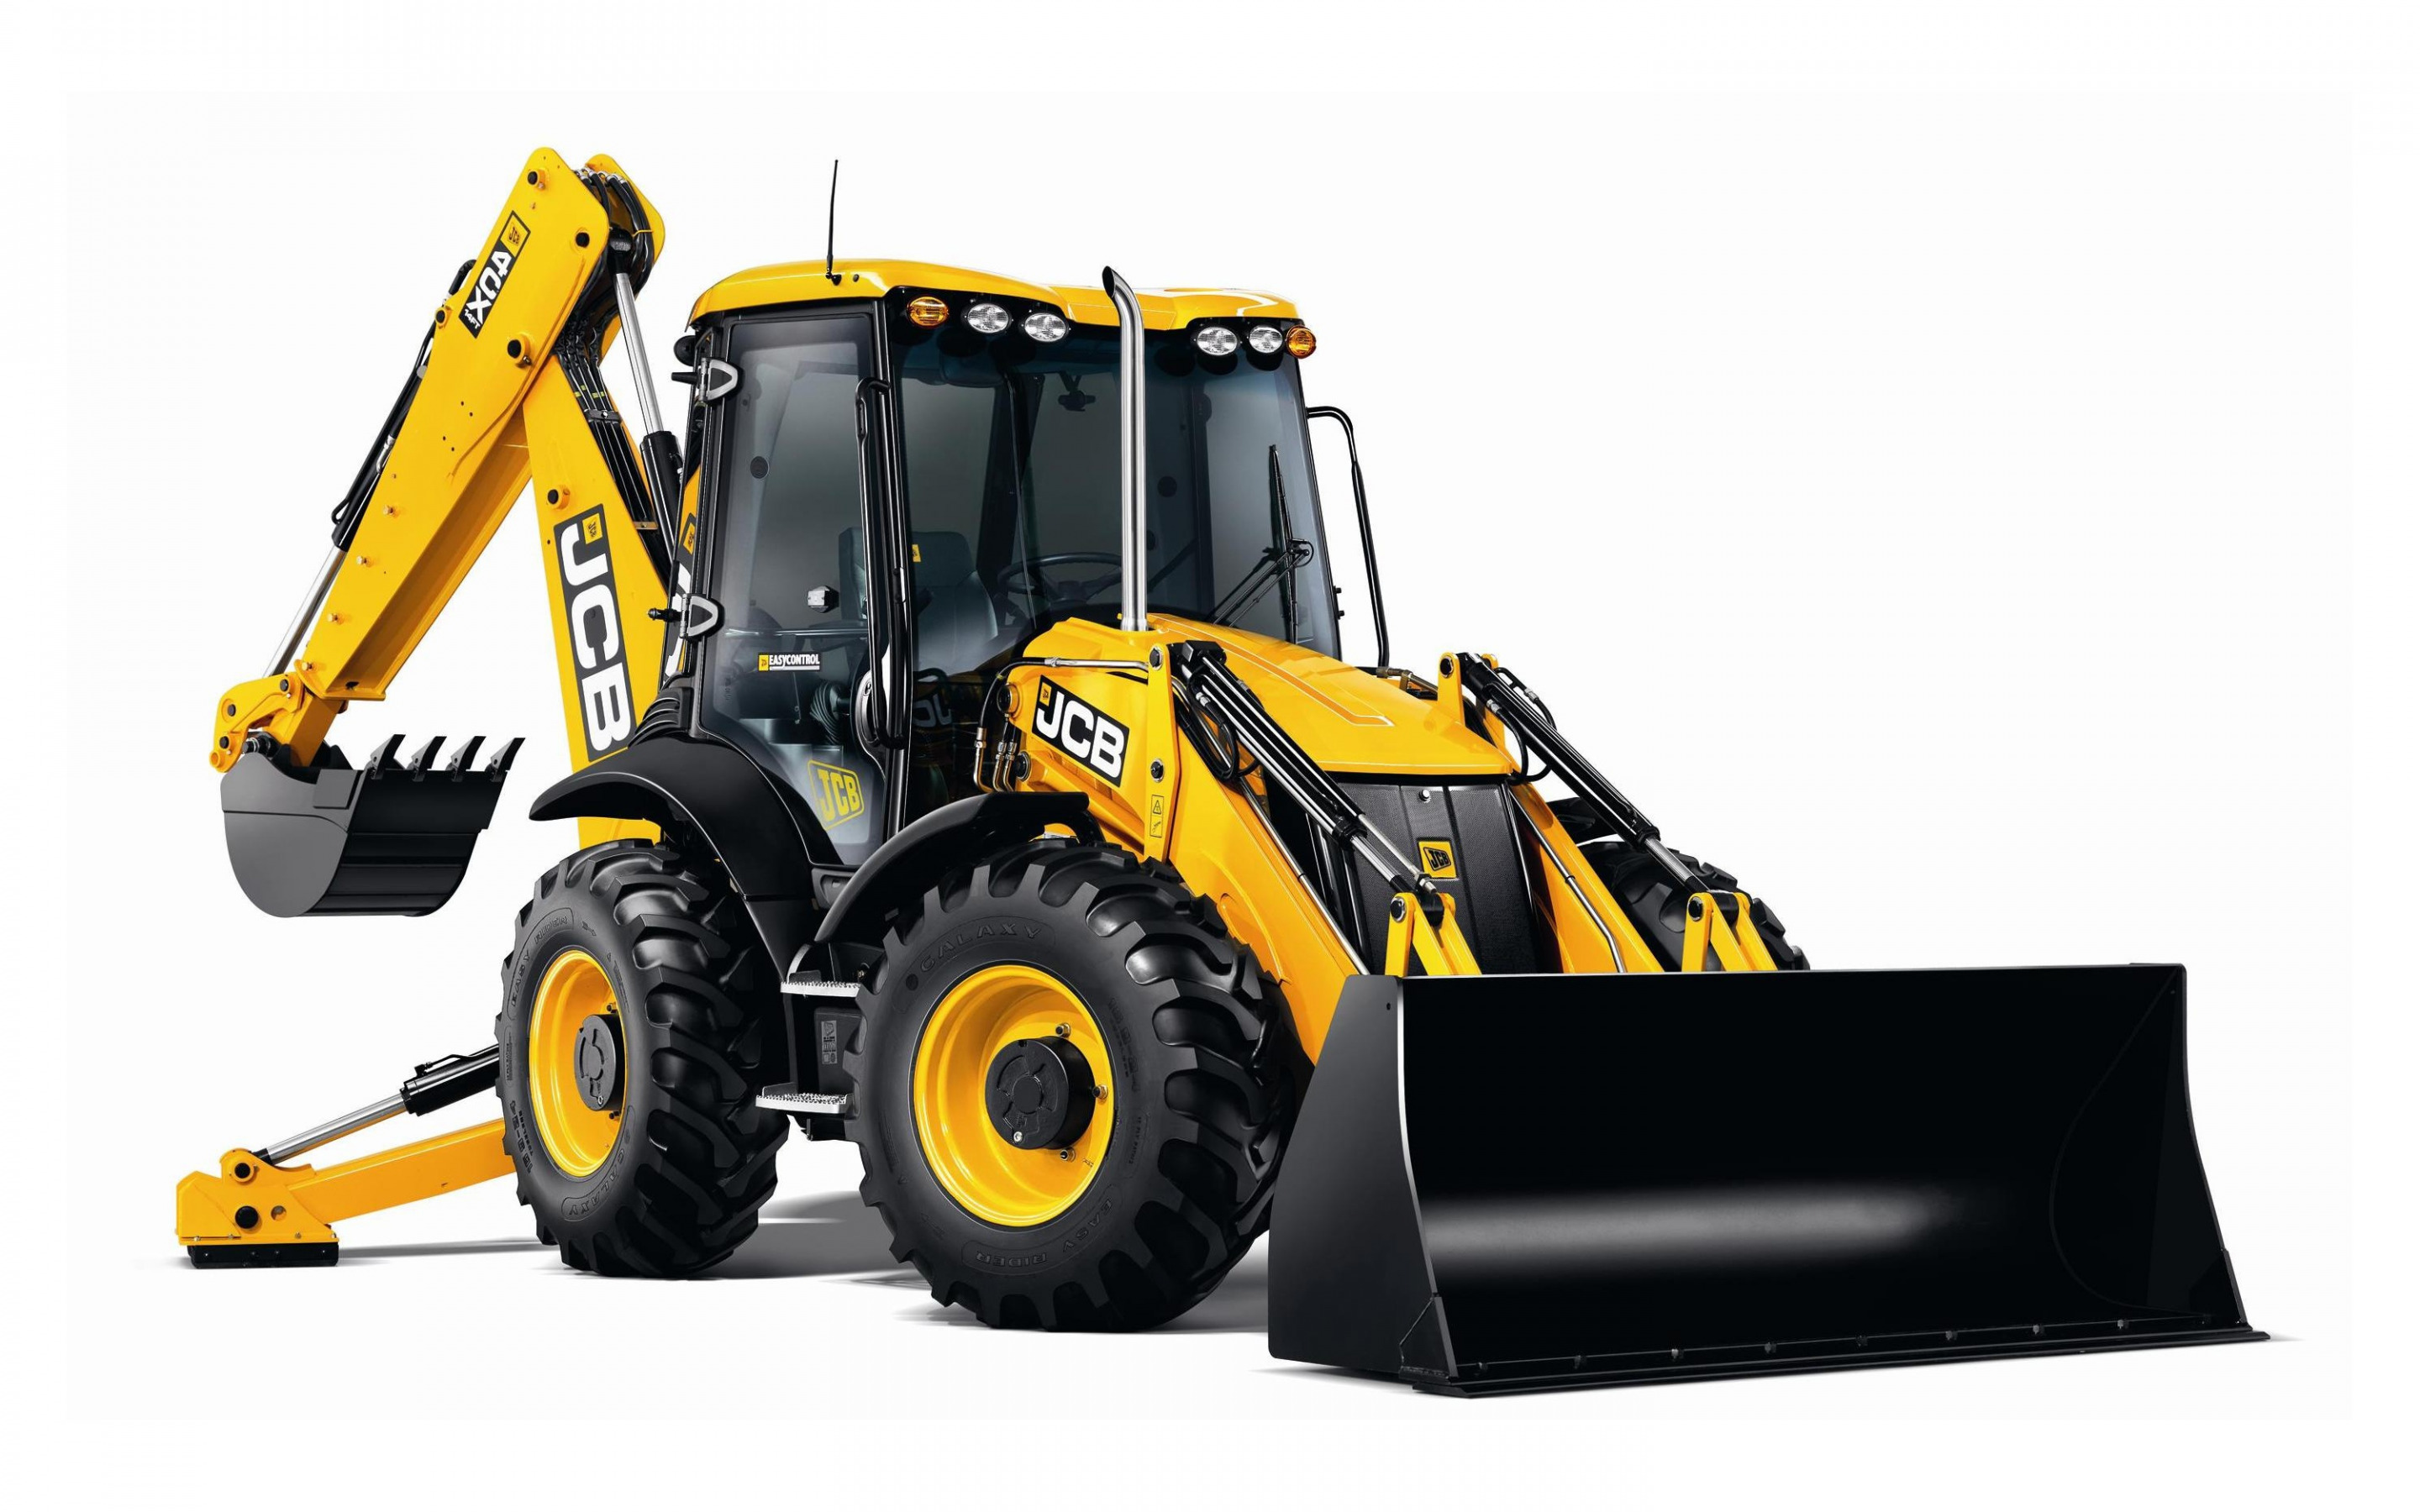 Jcb Images Wallpapers